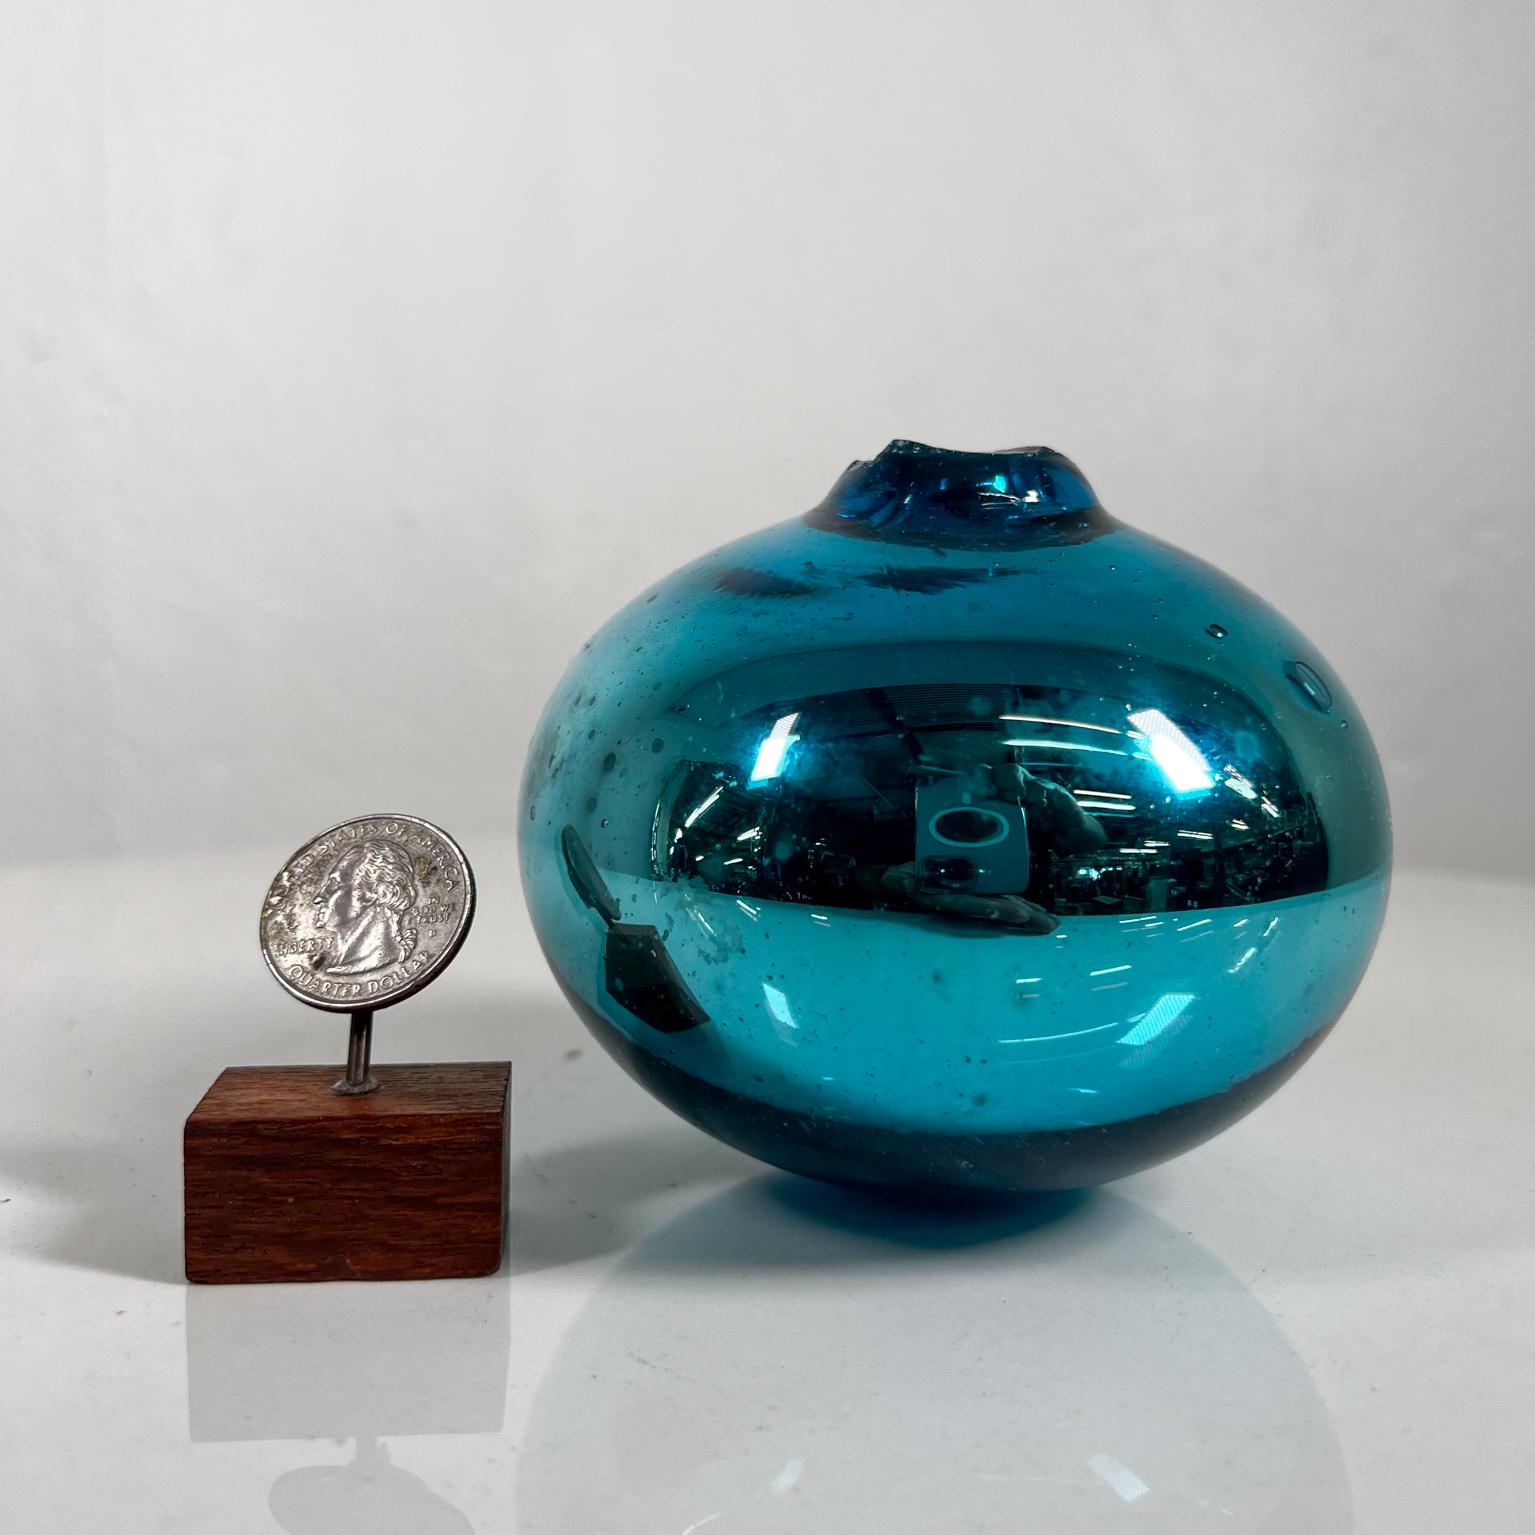 Mexican Midcentury Mercury Glass Art Ball Ethereal Blue
Rare color
4 diameter x 3.5 h
Preowned vintage good condition
Refer to images provided.